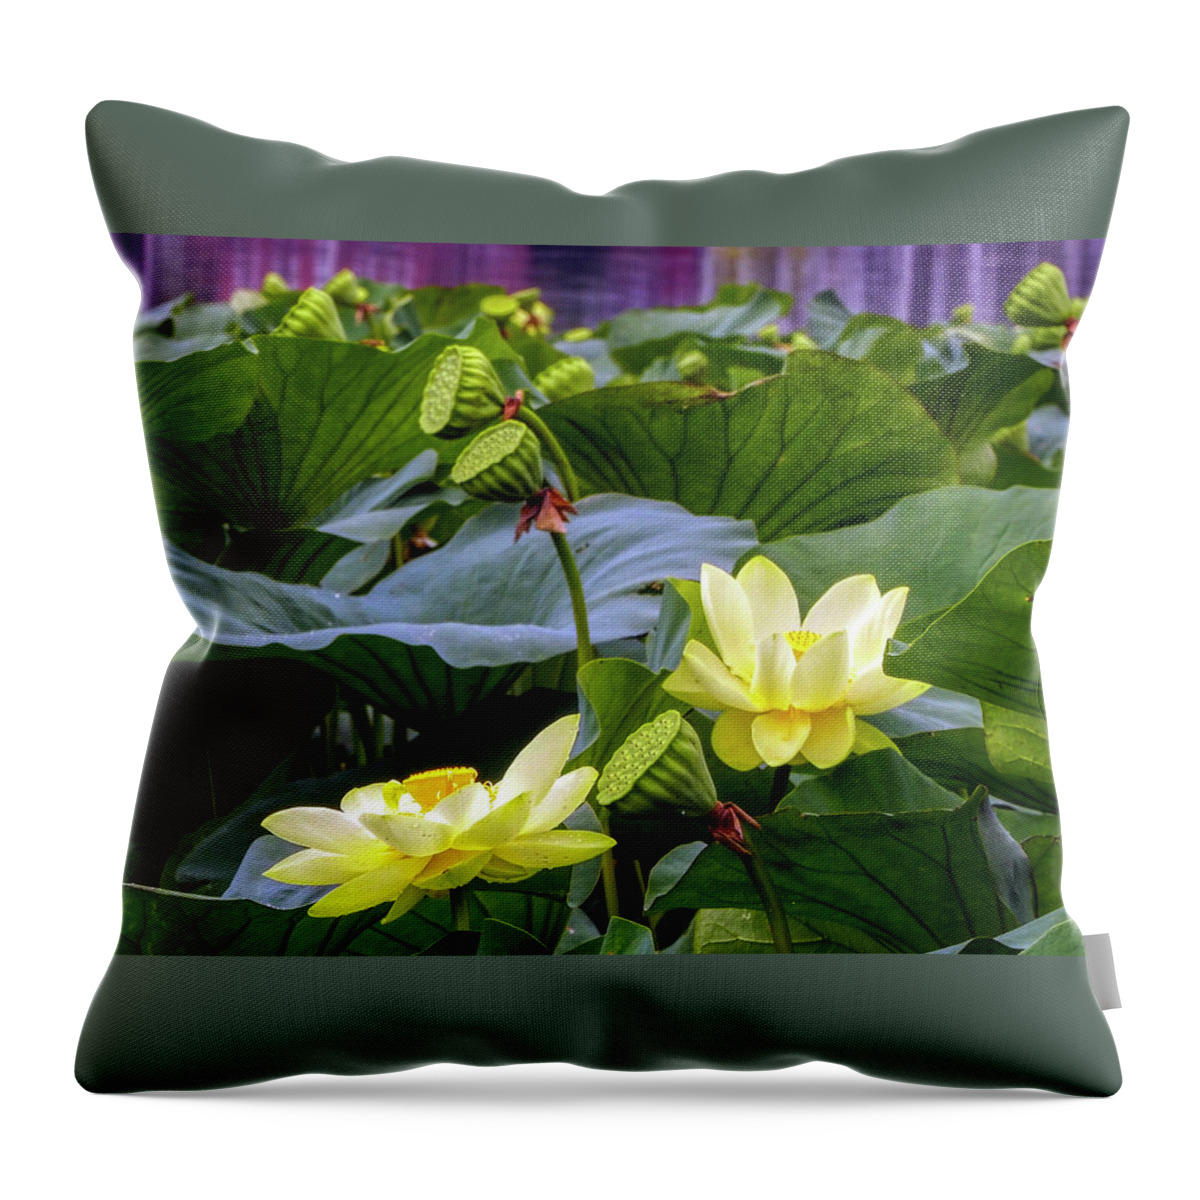 Lotus Throw Pillow featuring the photograph Lotus Field by Farol Tomson